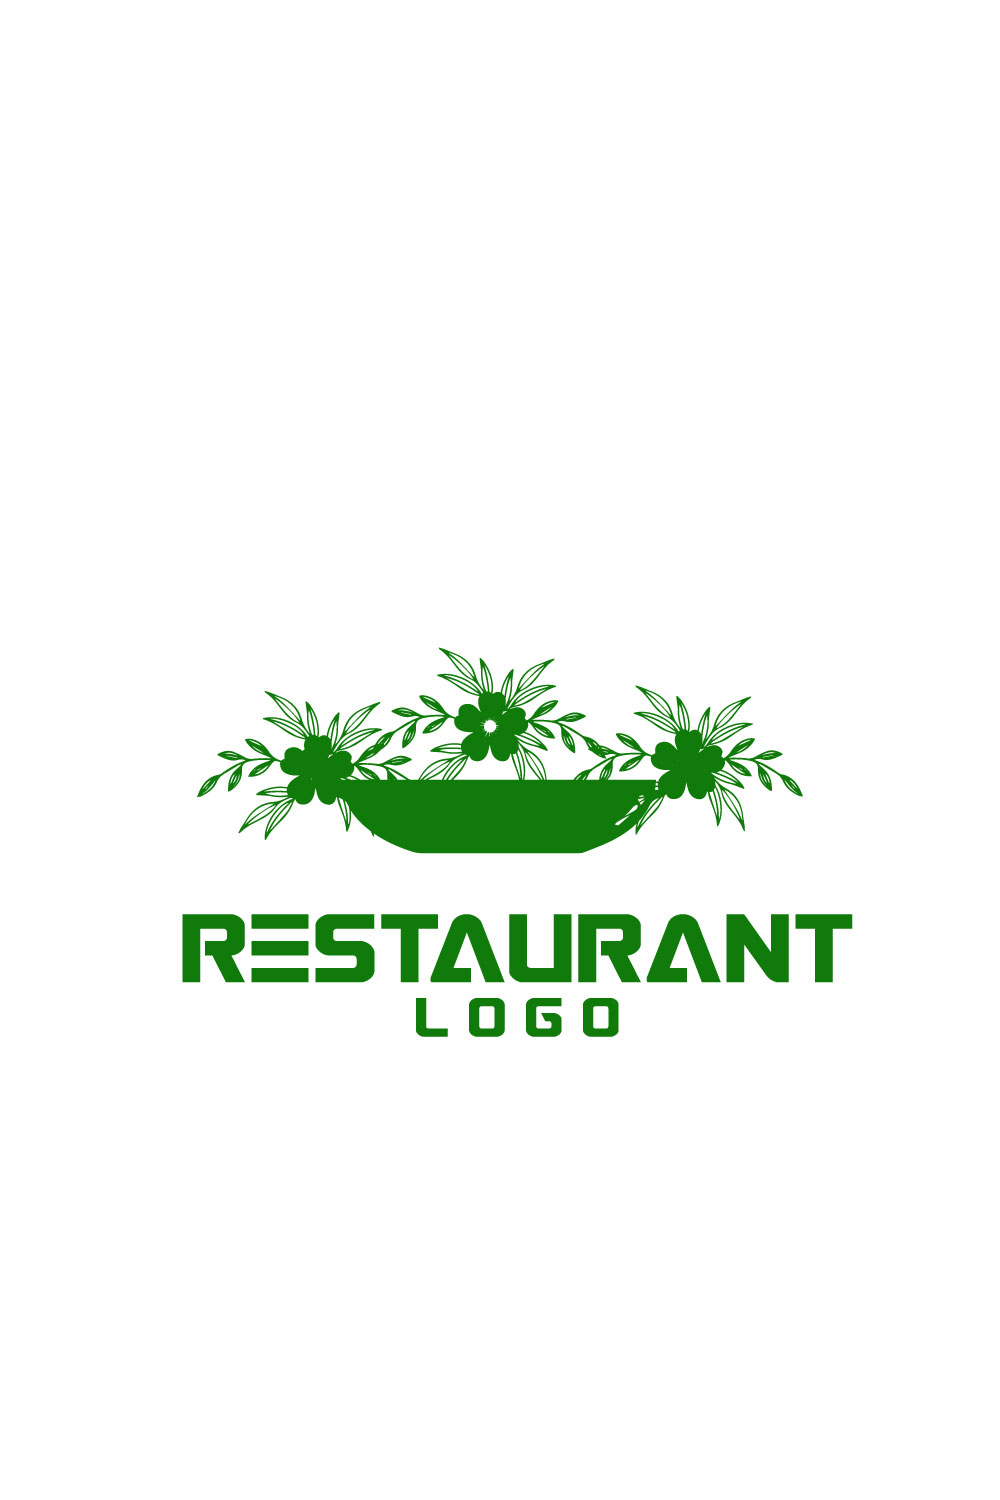 Free Culinary Creations logo pinterest preview image.